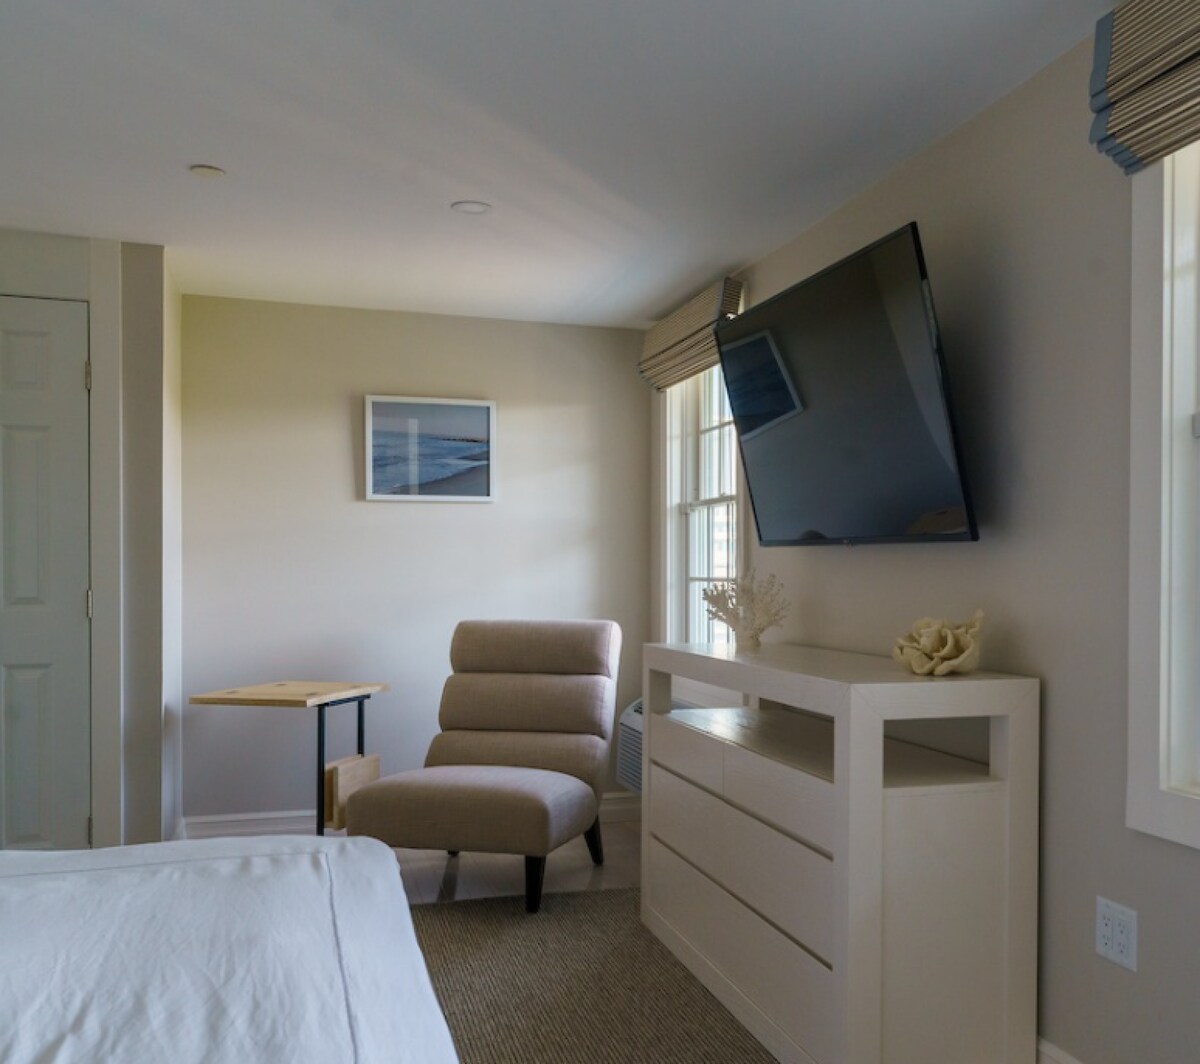 Montauk Suite – Located in the Heart of Watch Hill